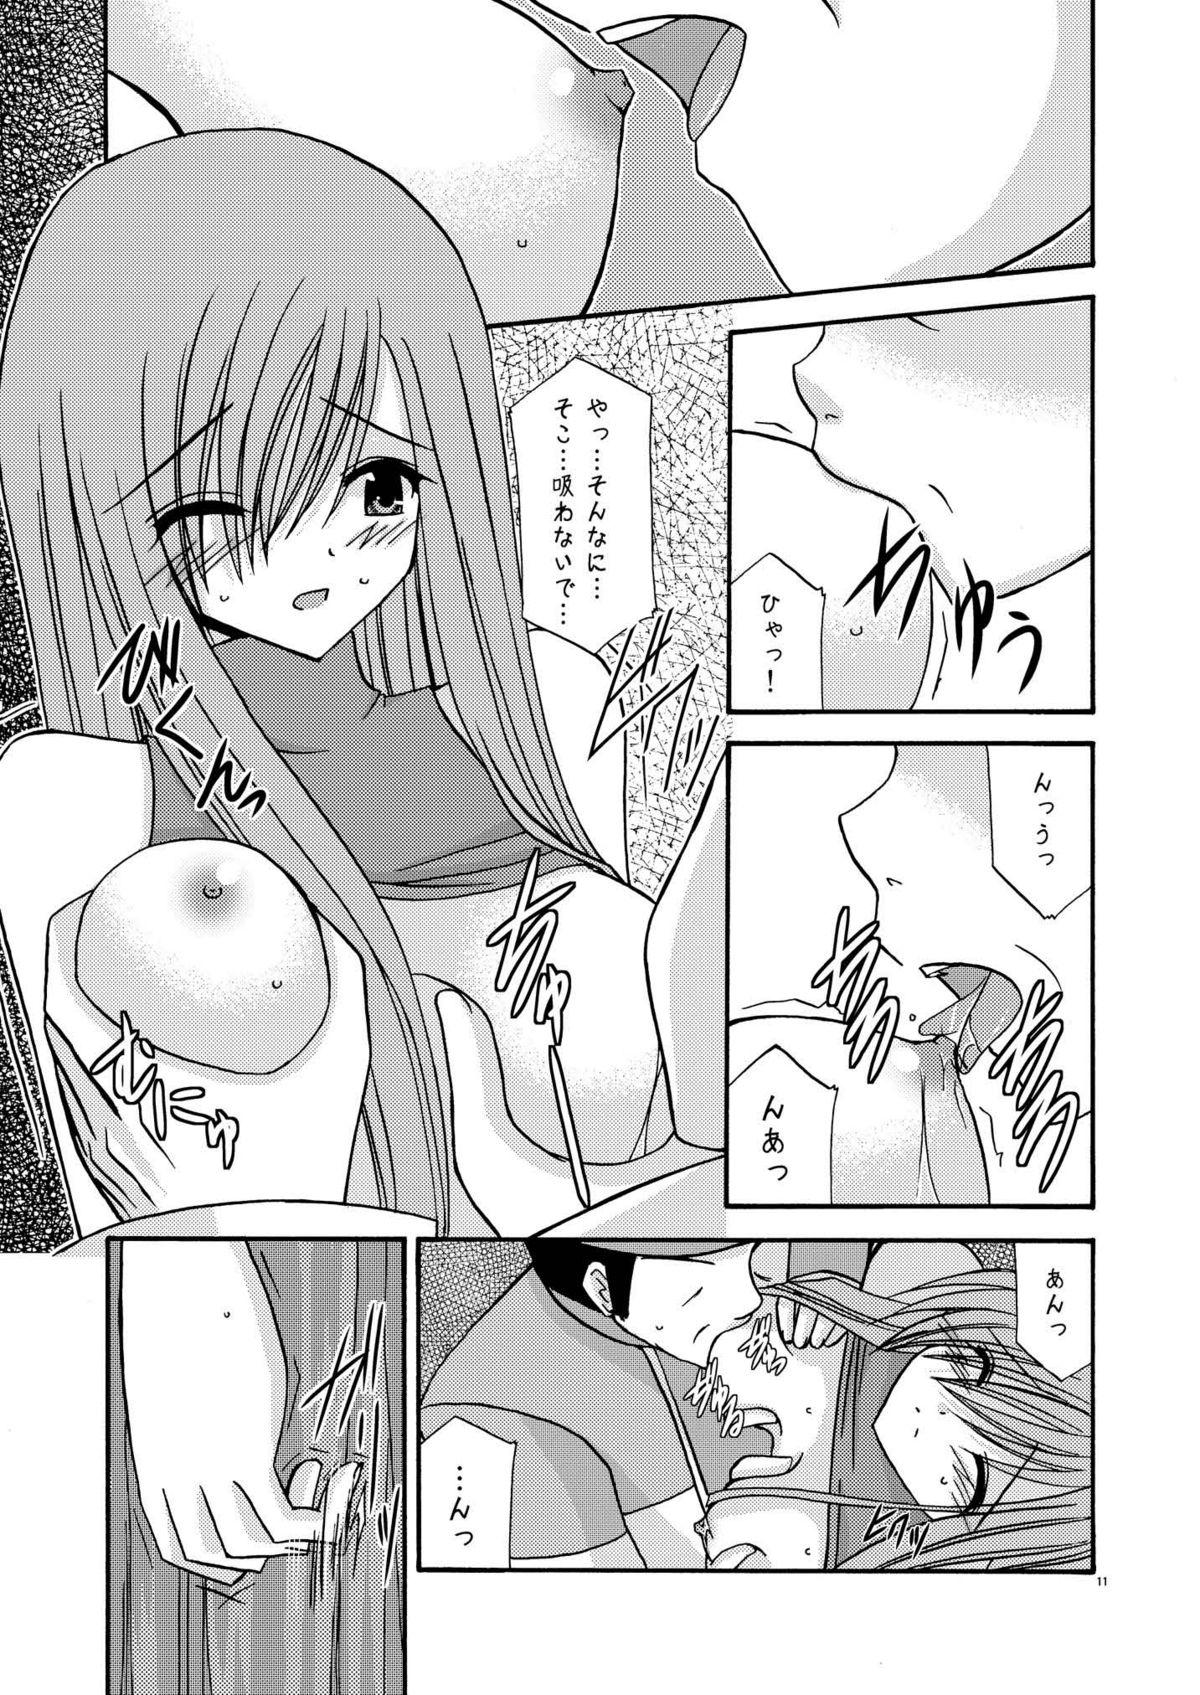 Special Locations Tales of Phallus vol.2 - Tales of the abyss Trans - Page 11